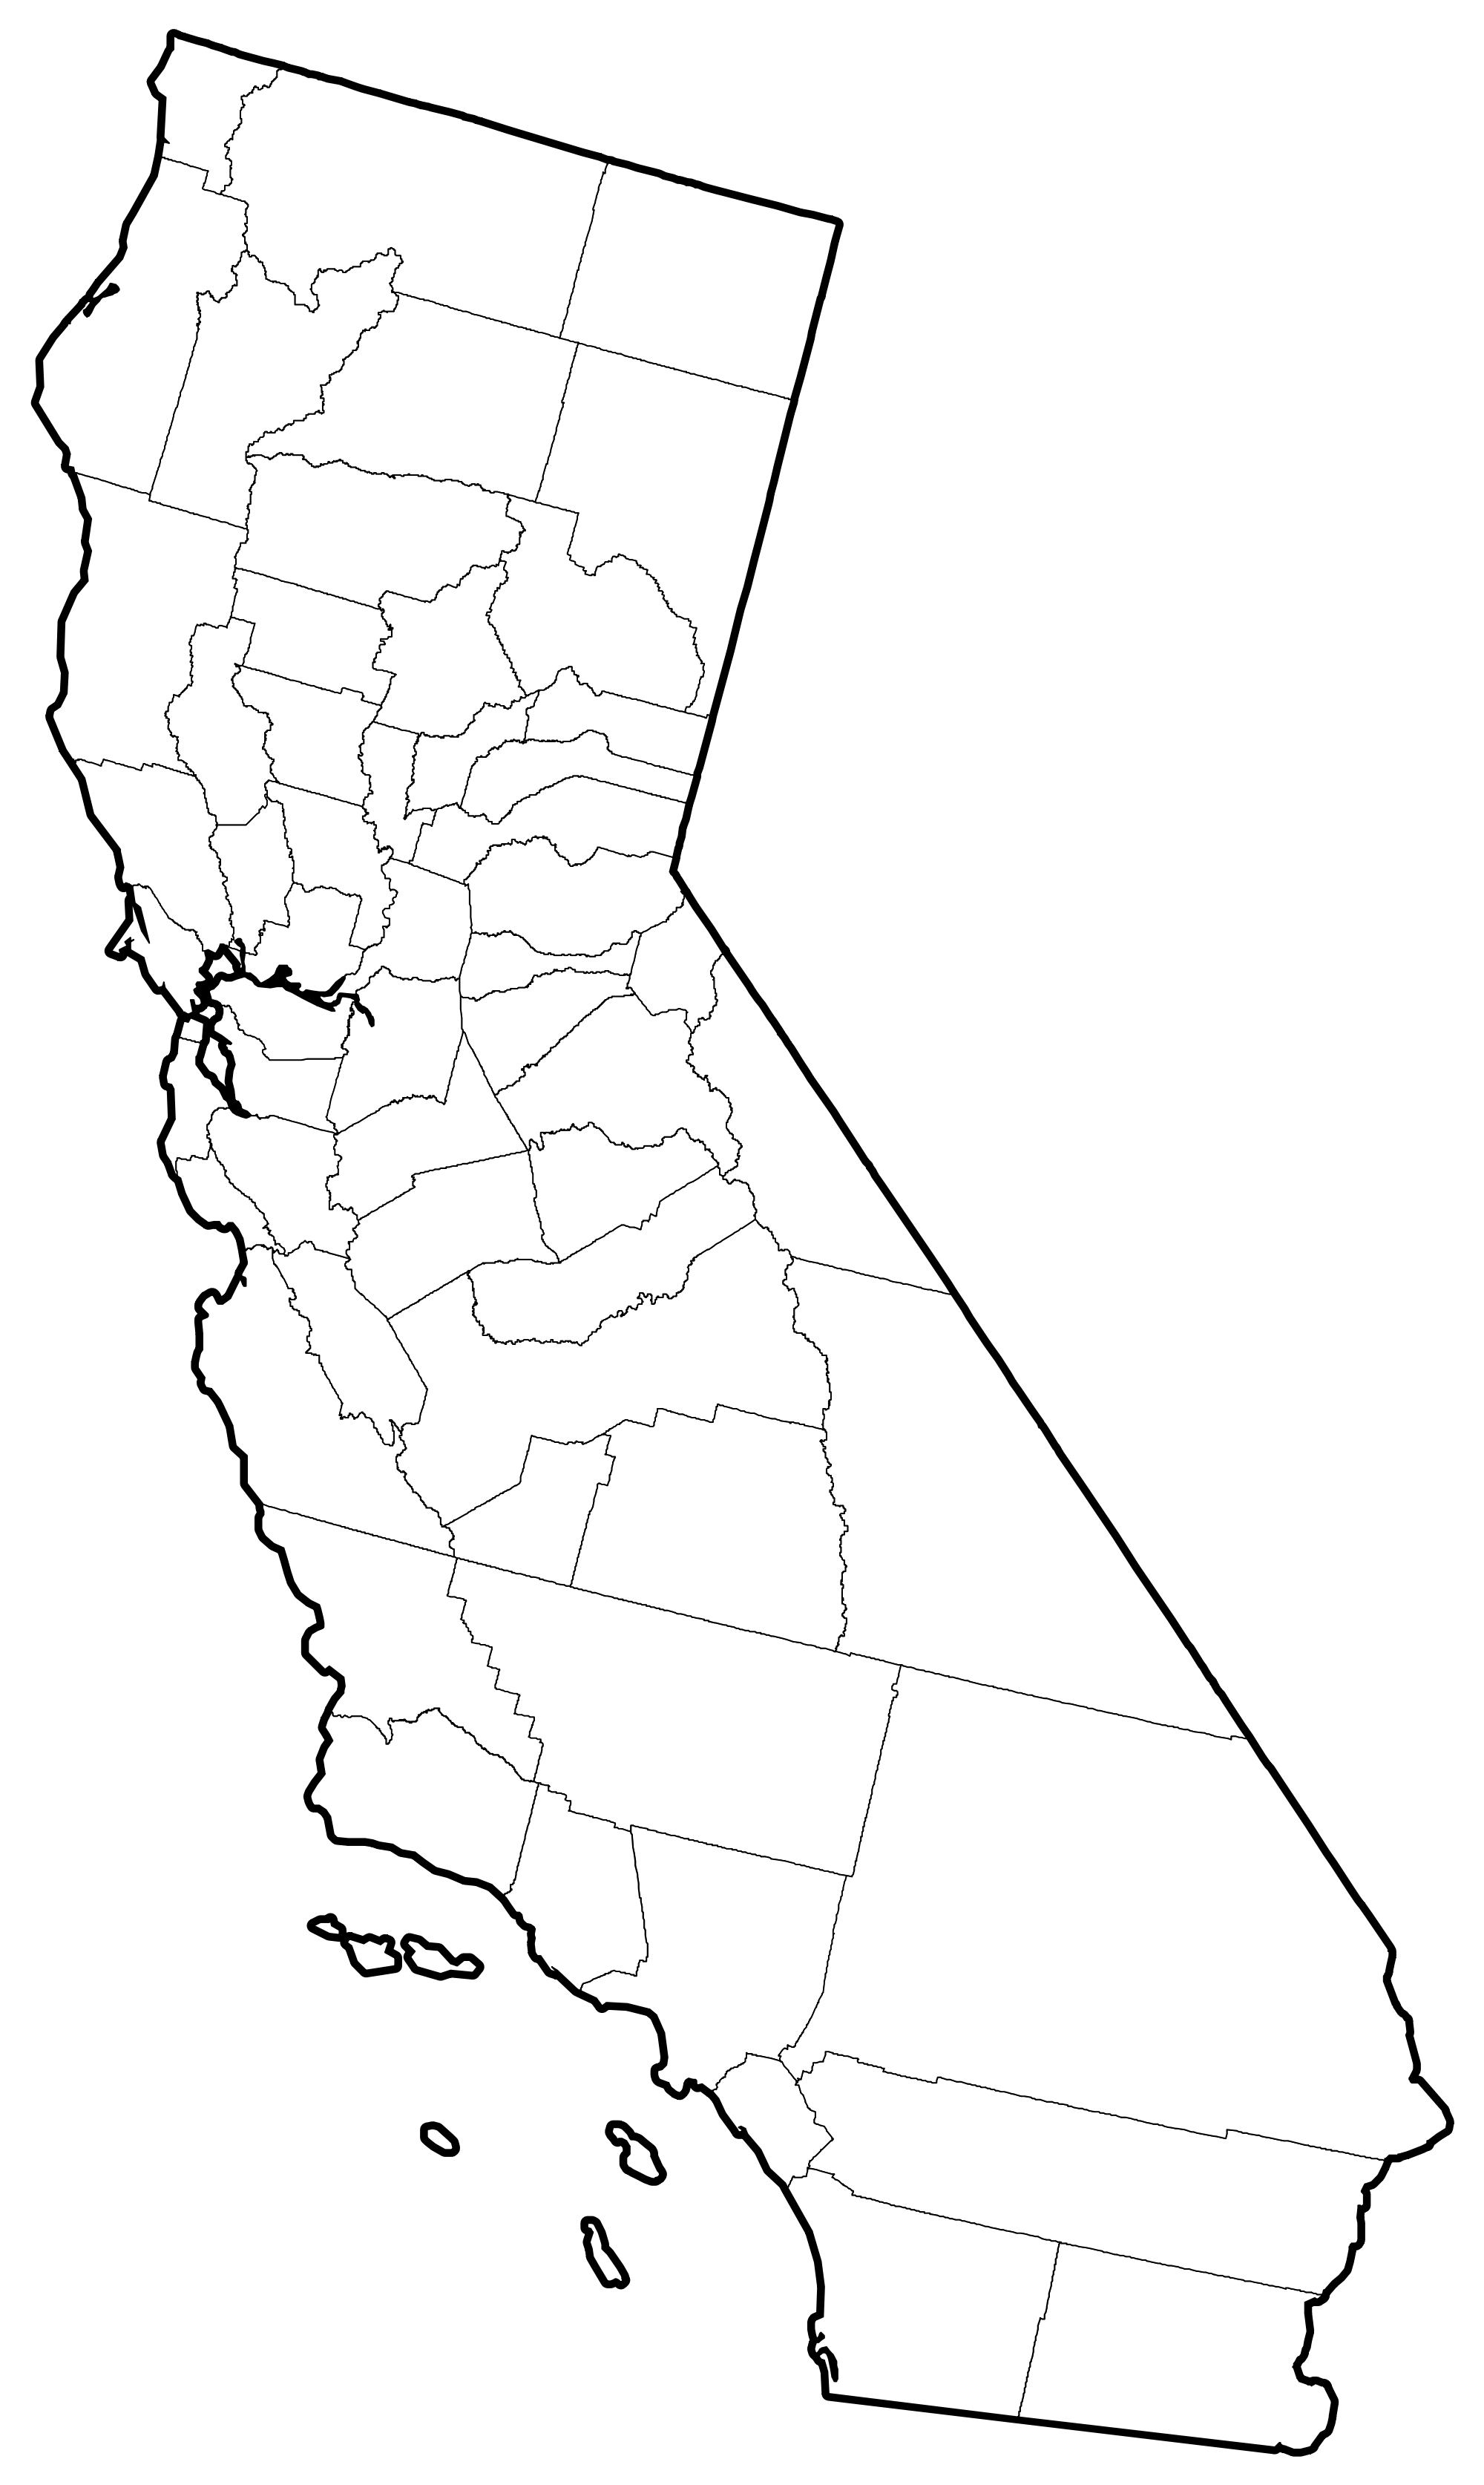 File:California counties outline map.svg - Wikimedia Commons